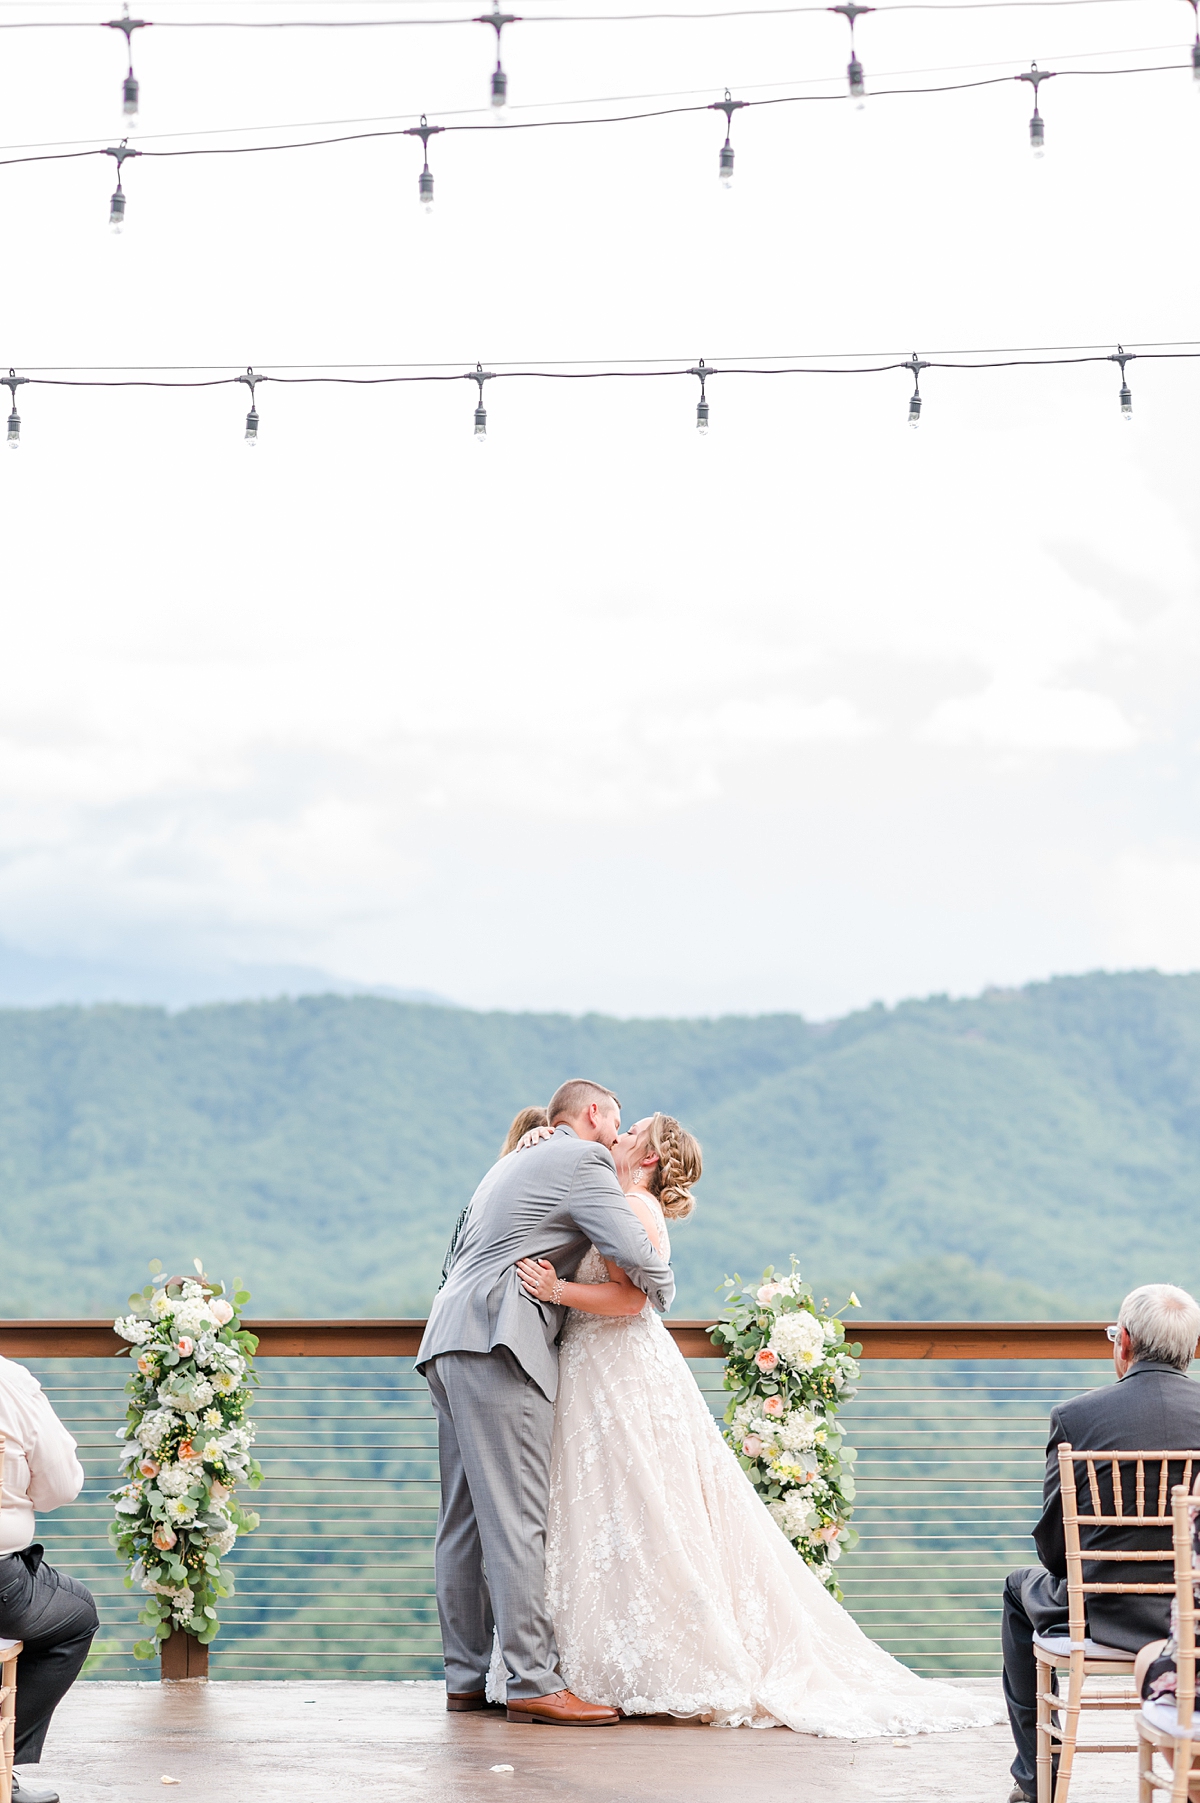 Summer Smoky Mountain Wedding Ceremony with Mountain Views at The Magnolia Venue in Tennessee. Wedding Photography by Virginia Wedding Photographer Kailey Brianne Photography. 